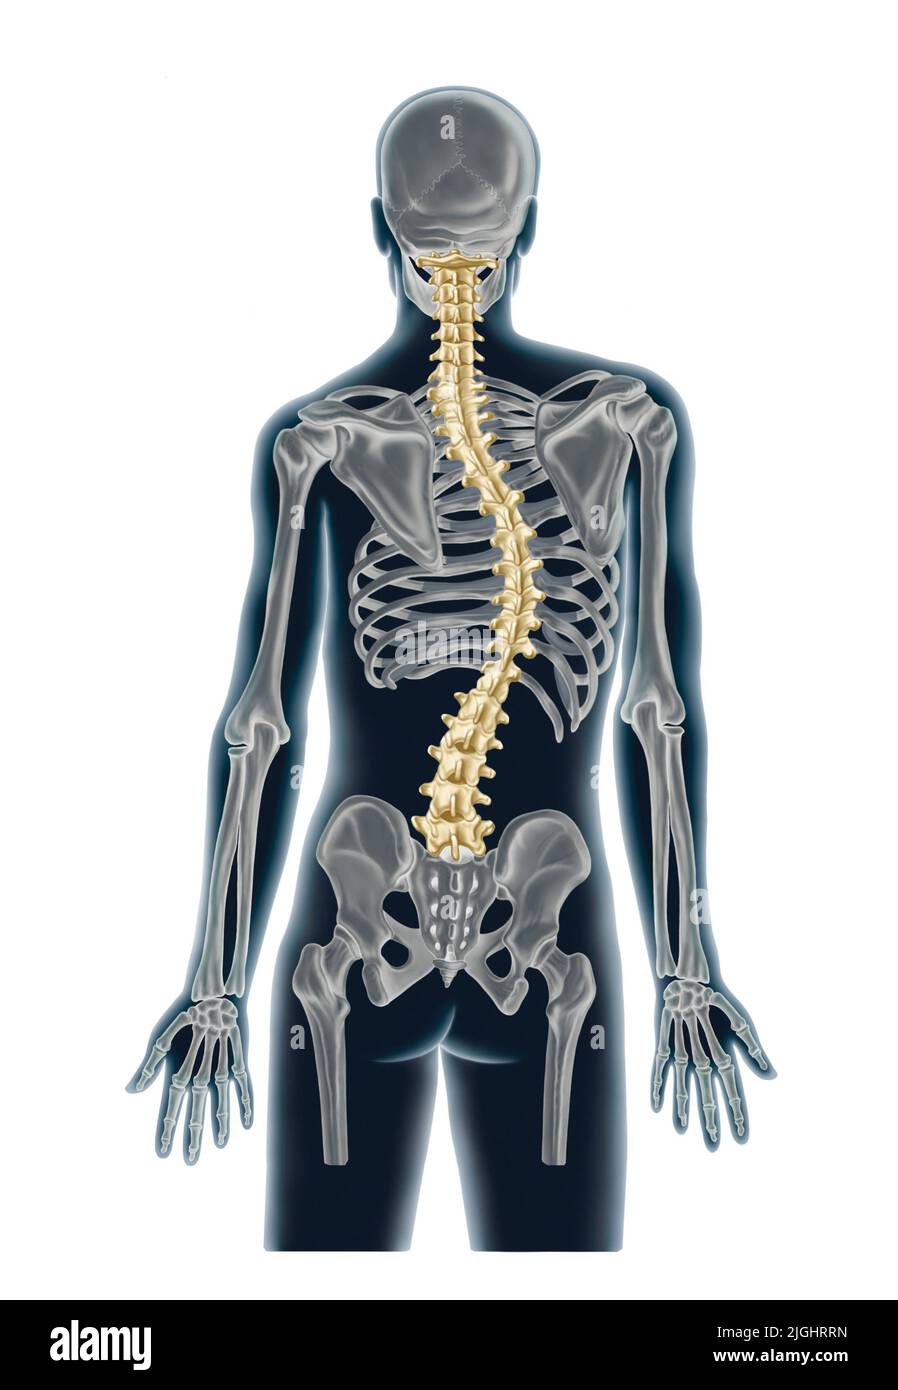 Scoliosis, abnormal lateral curving of the spine Stock Photo